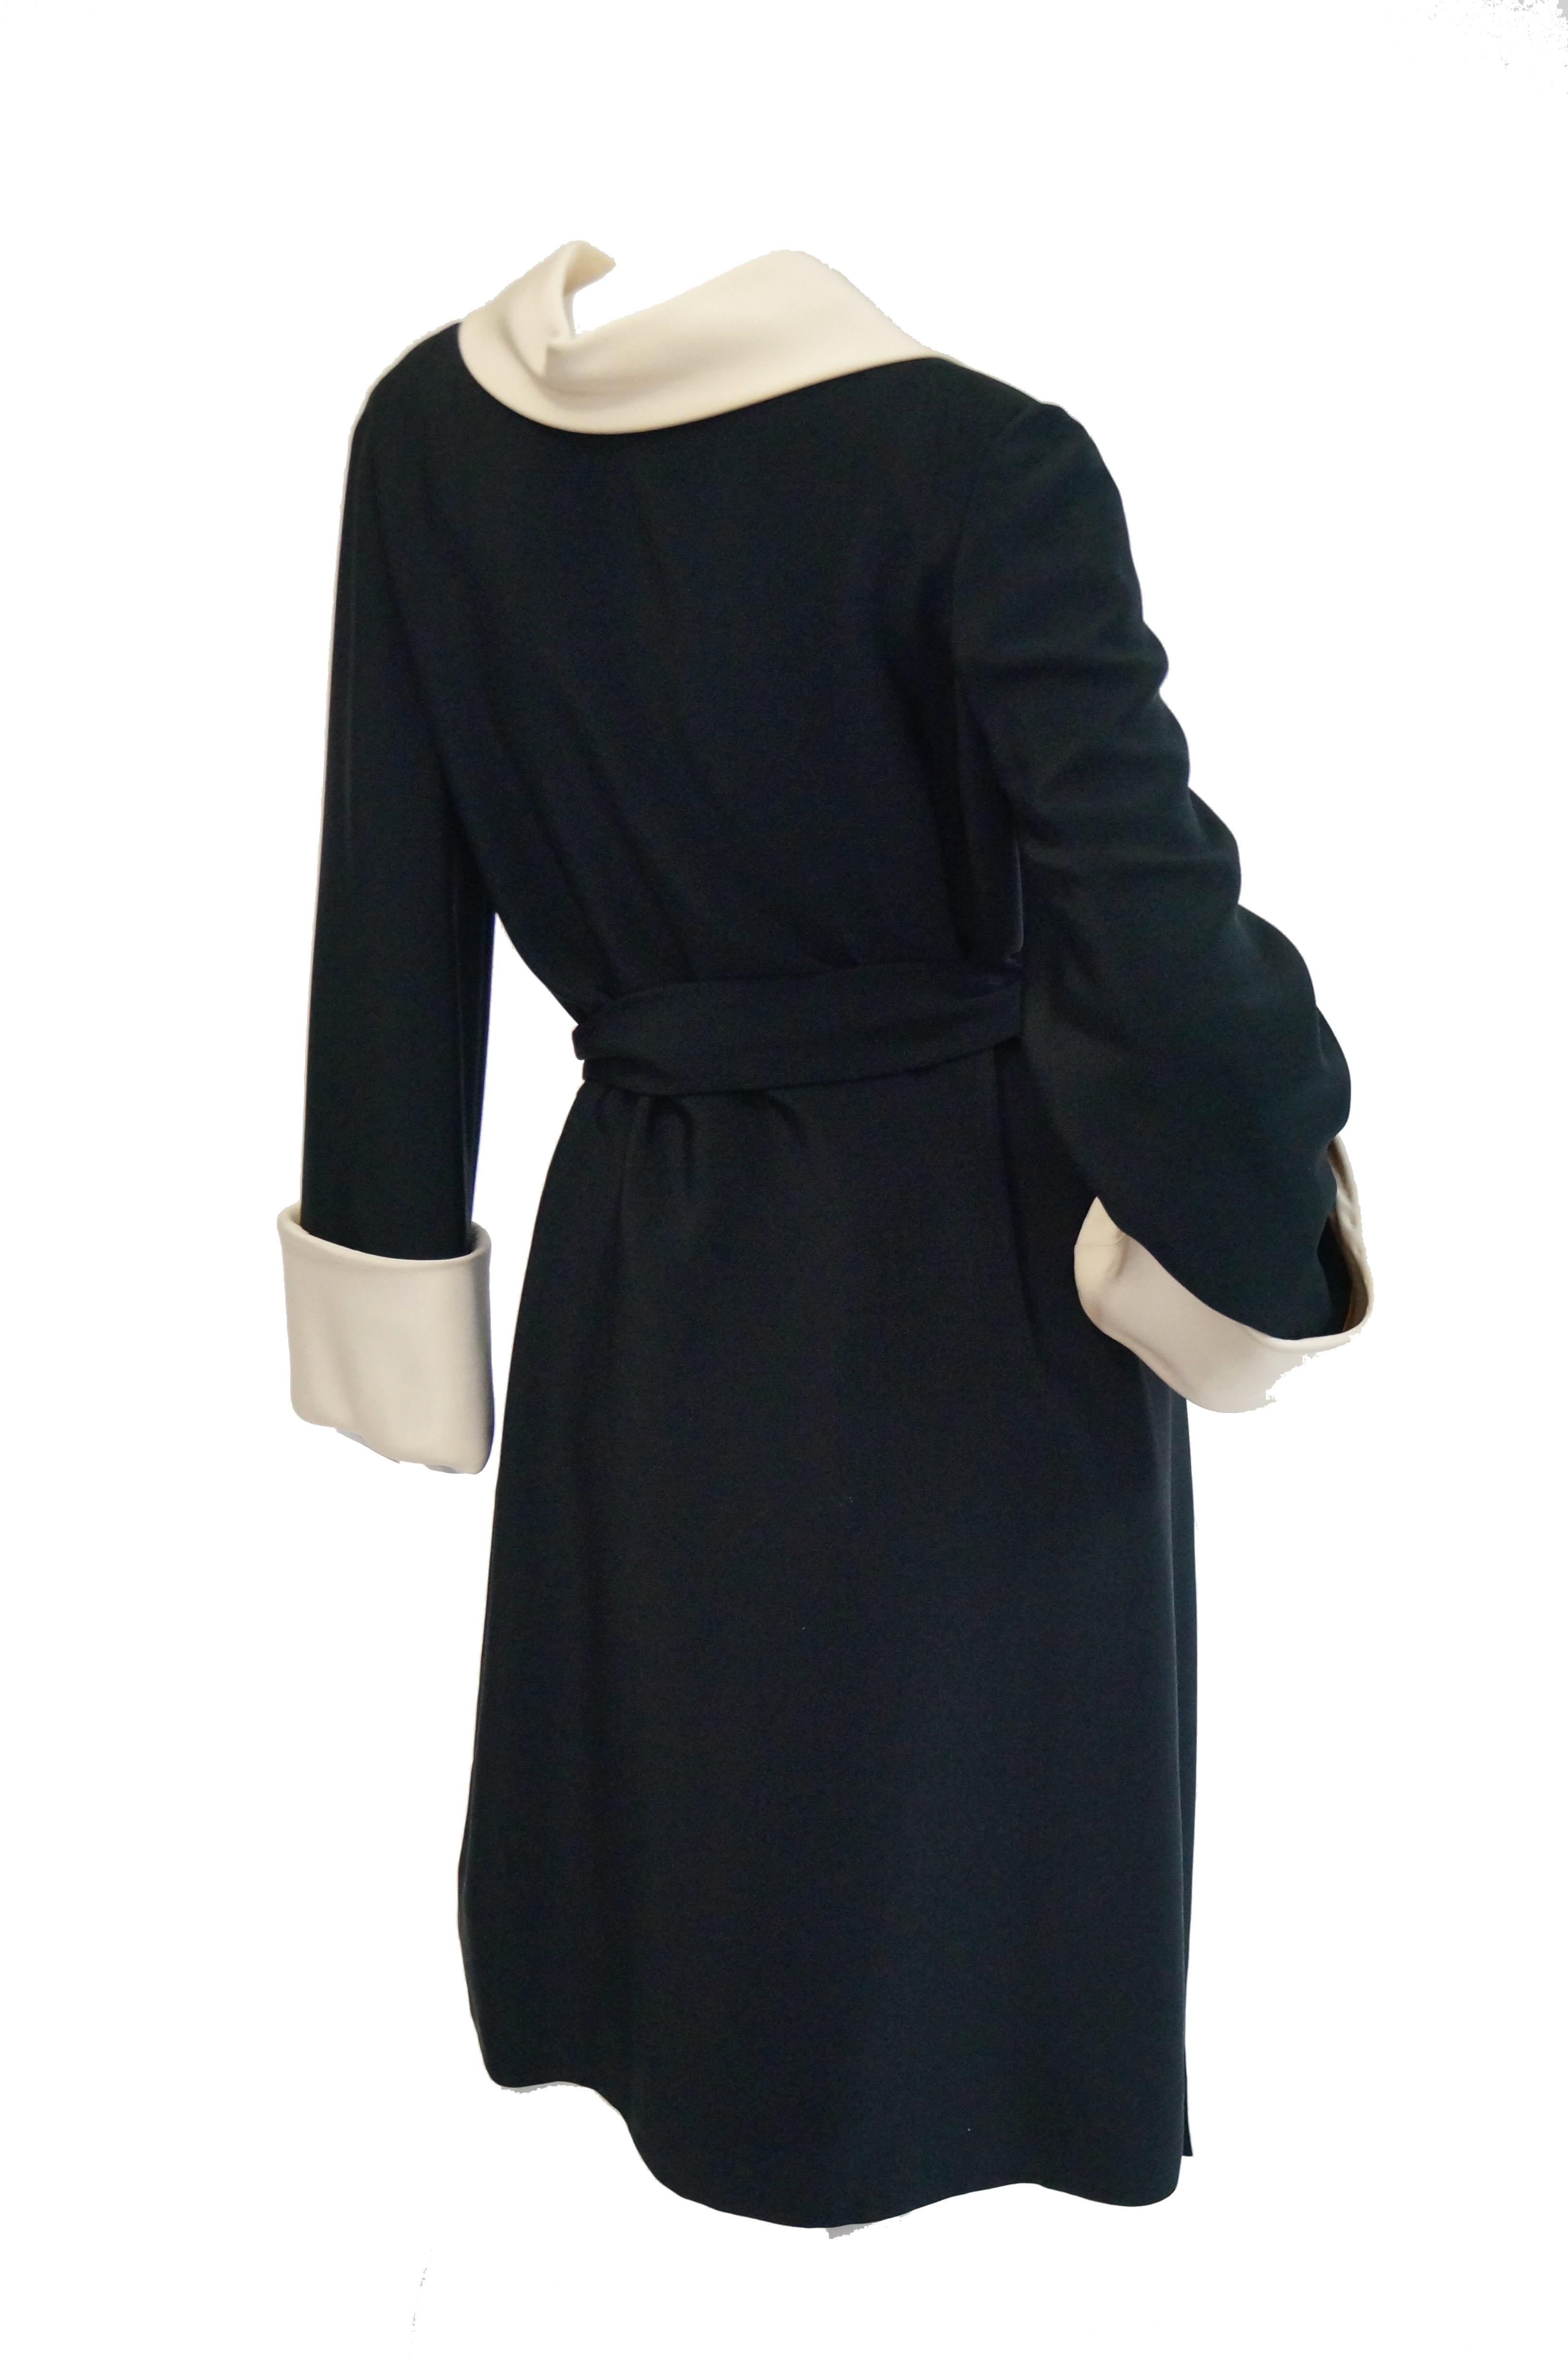 1960s Norman Norell Black and Cream Contrast Silk Shift Dress 1